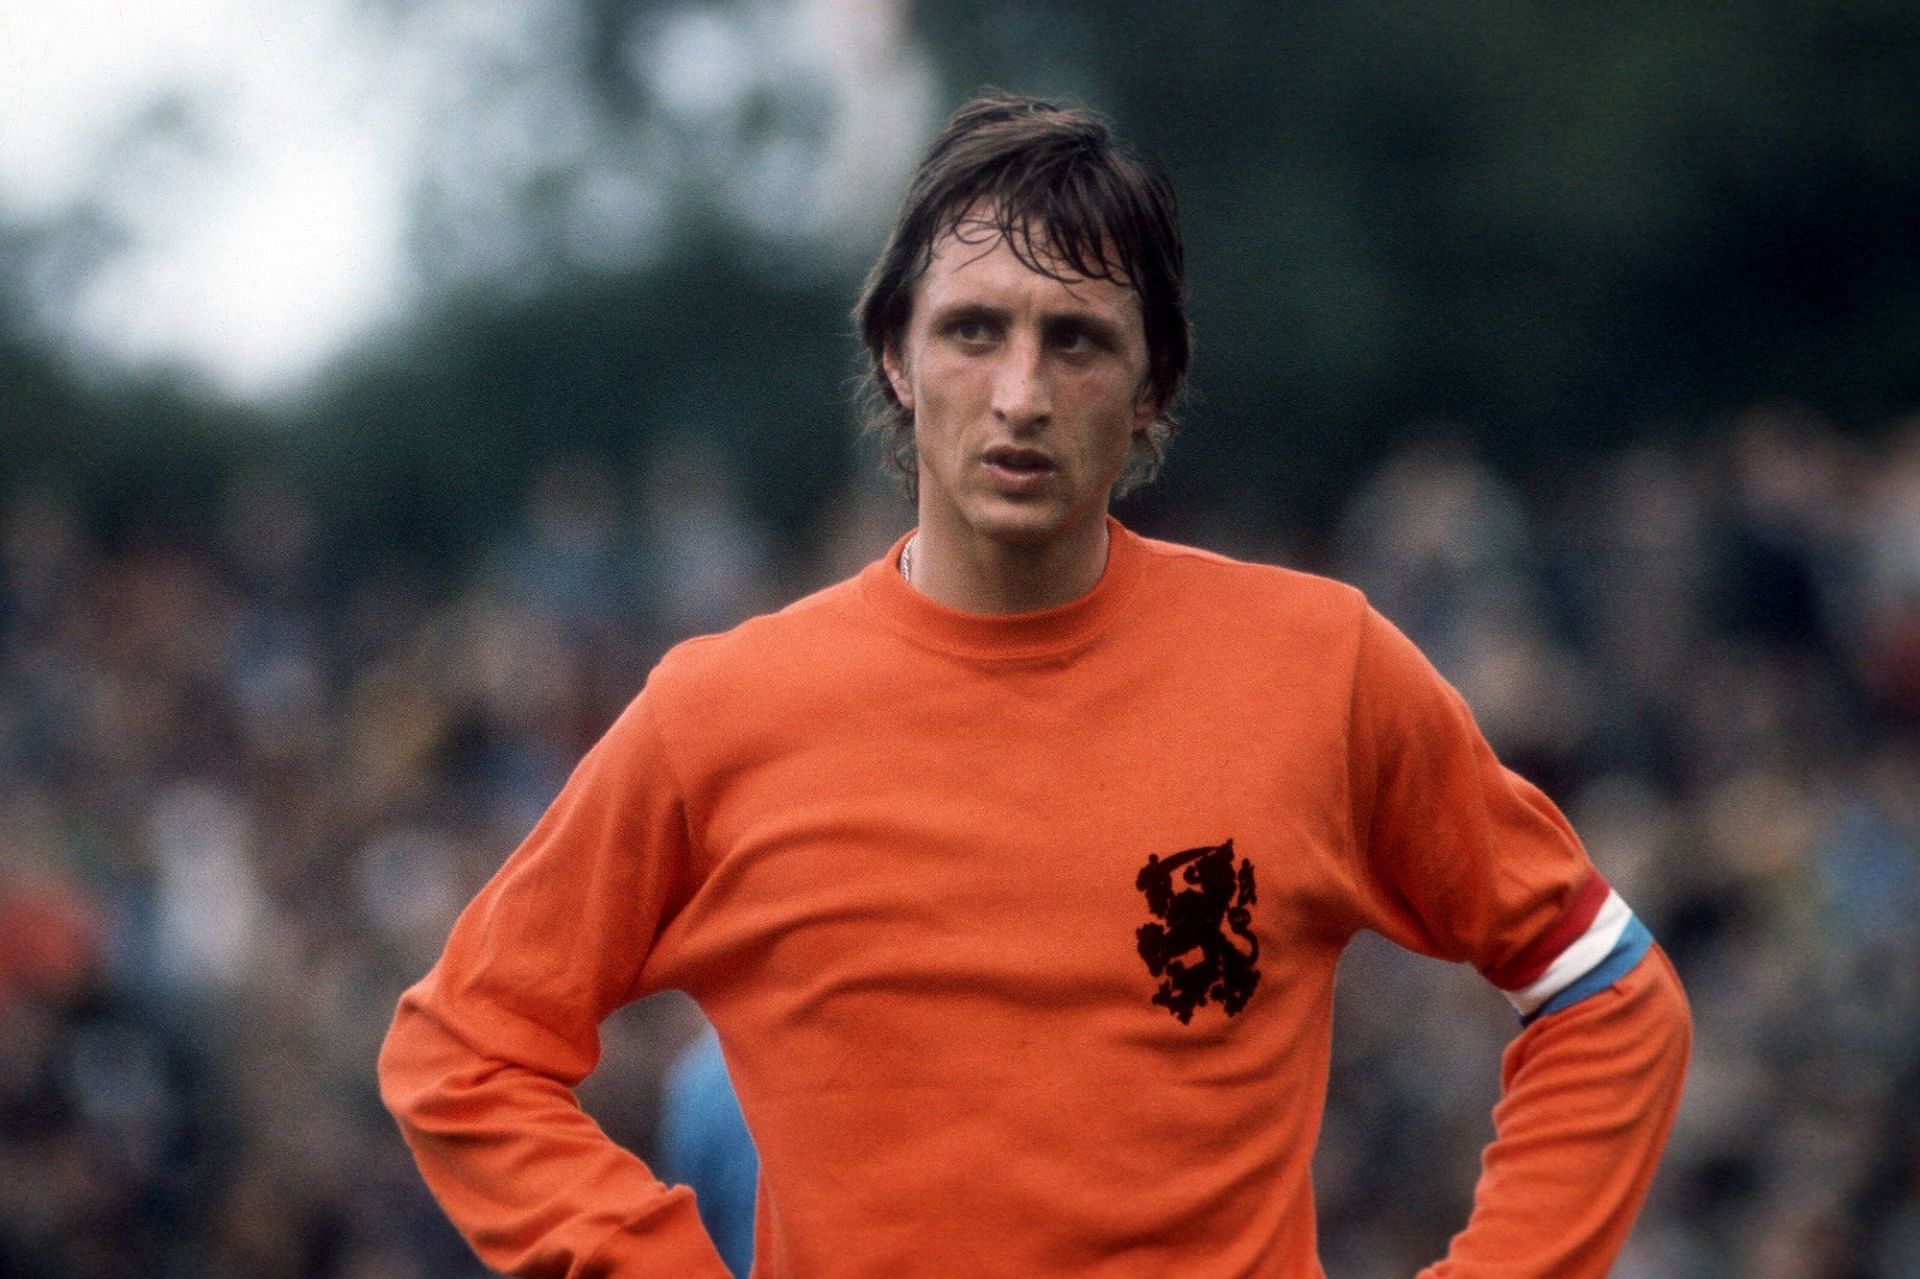 Johan Cruyff was so good that he invented a new skill move that is taught worldwide today - The Cruyff turn.